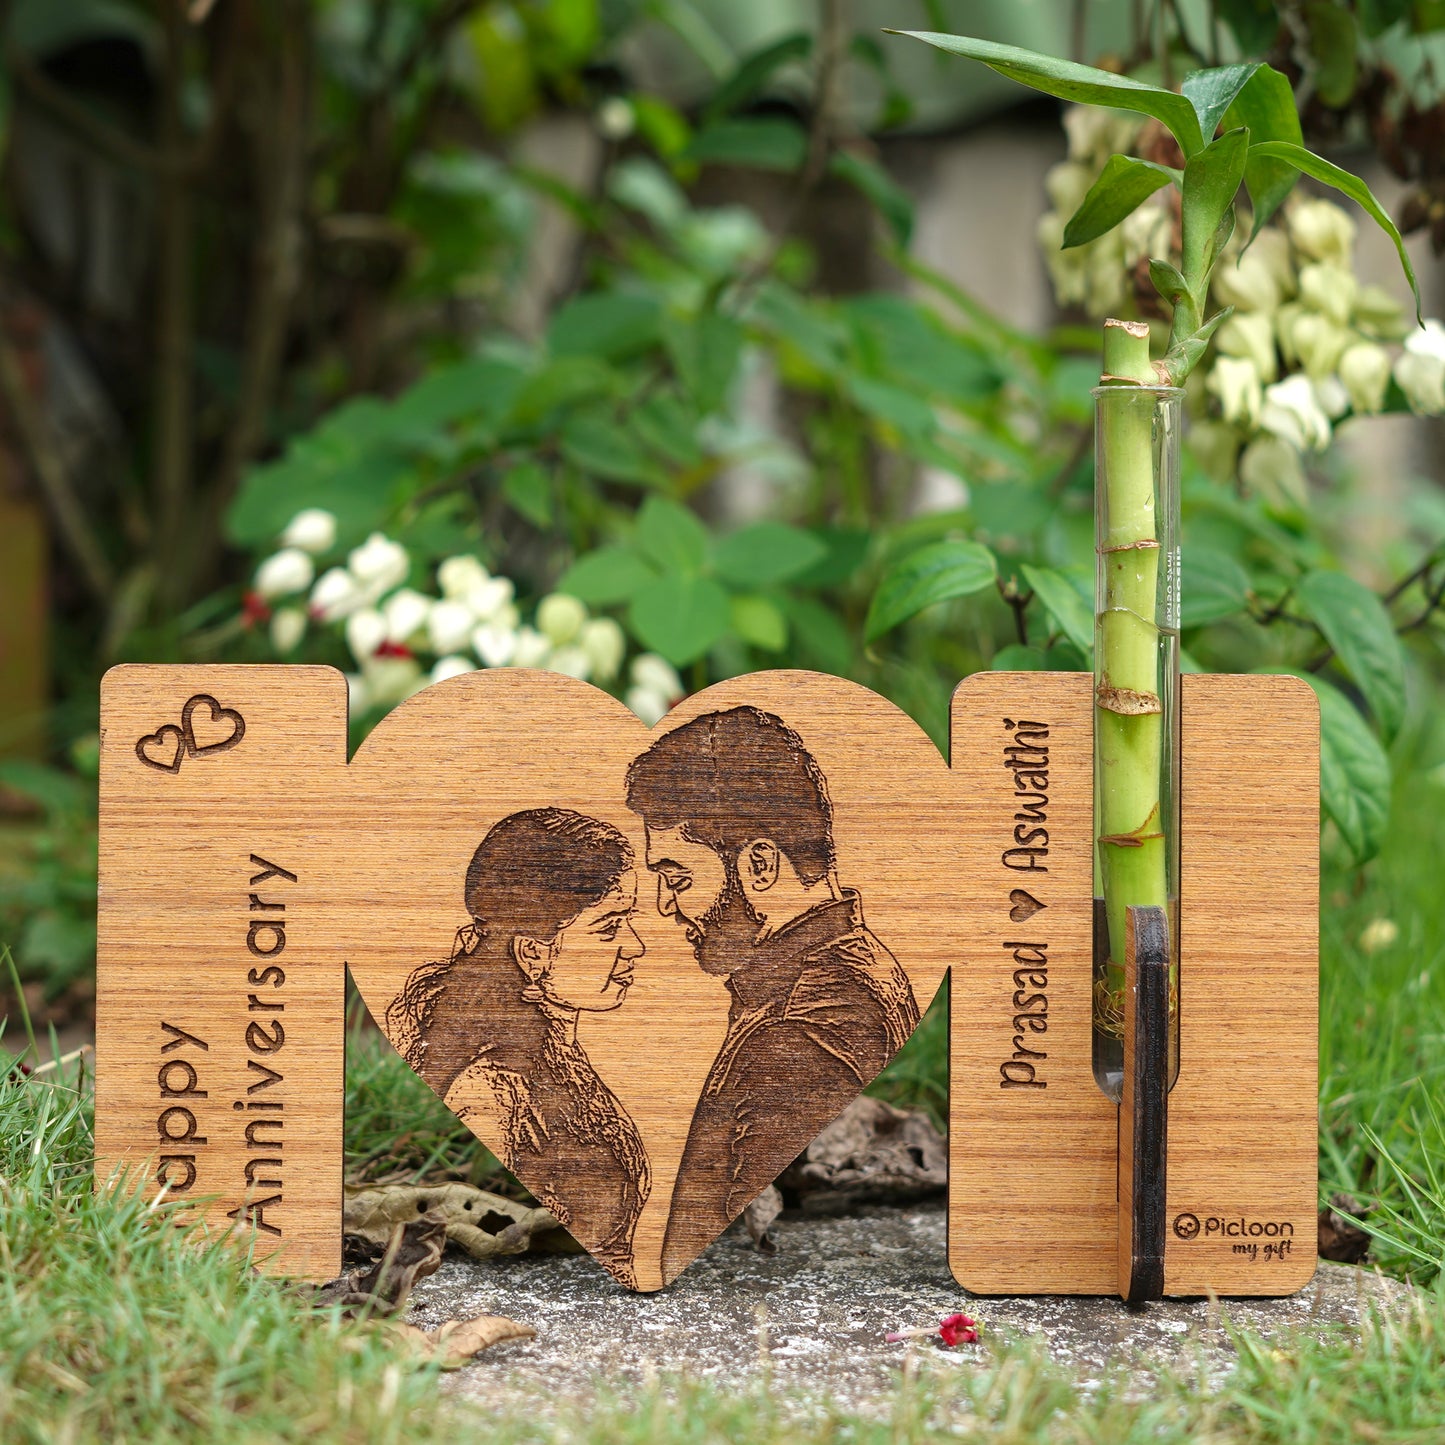 Growing Together: Personalized Wood Engraved Wedding Gift with Plant Vase - A Lasting Symbol of Love